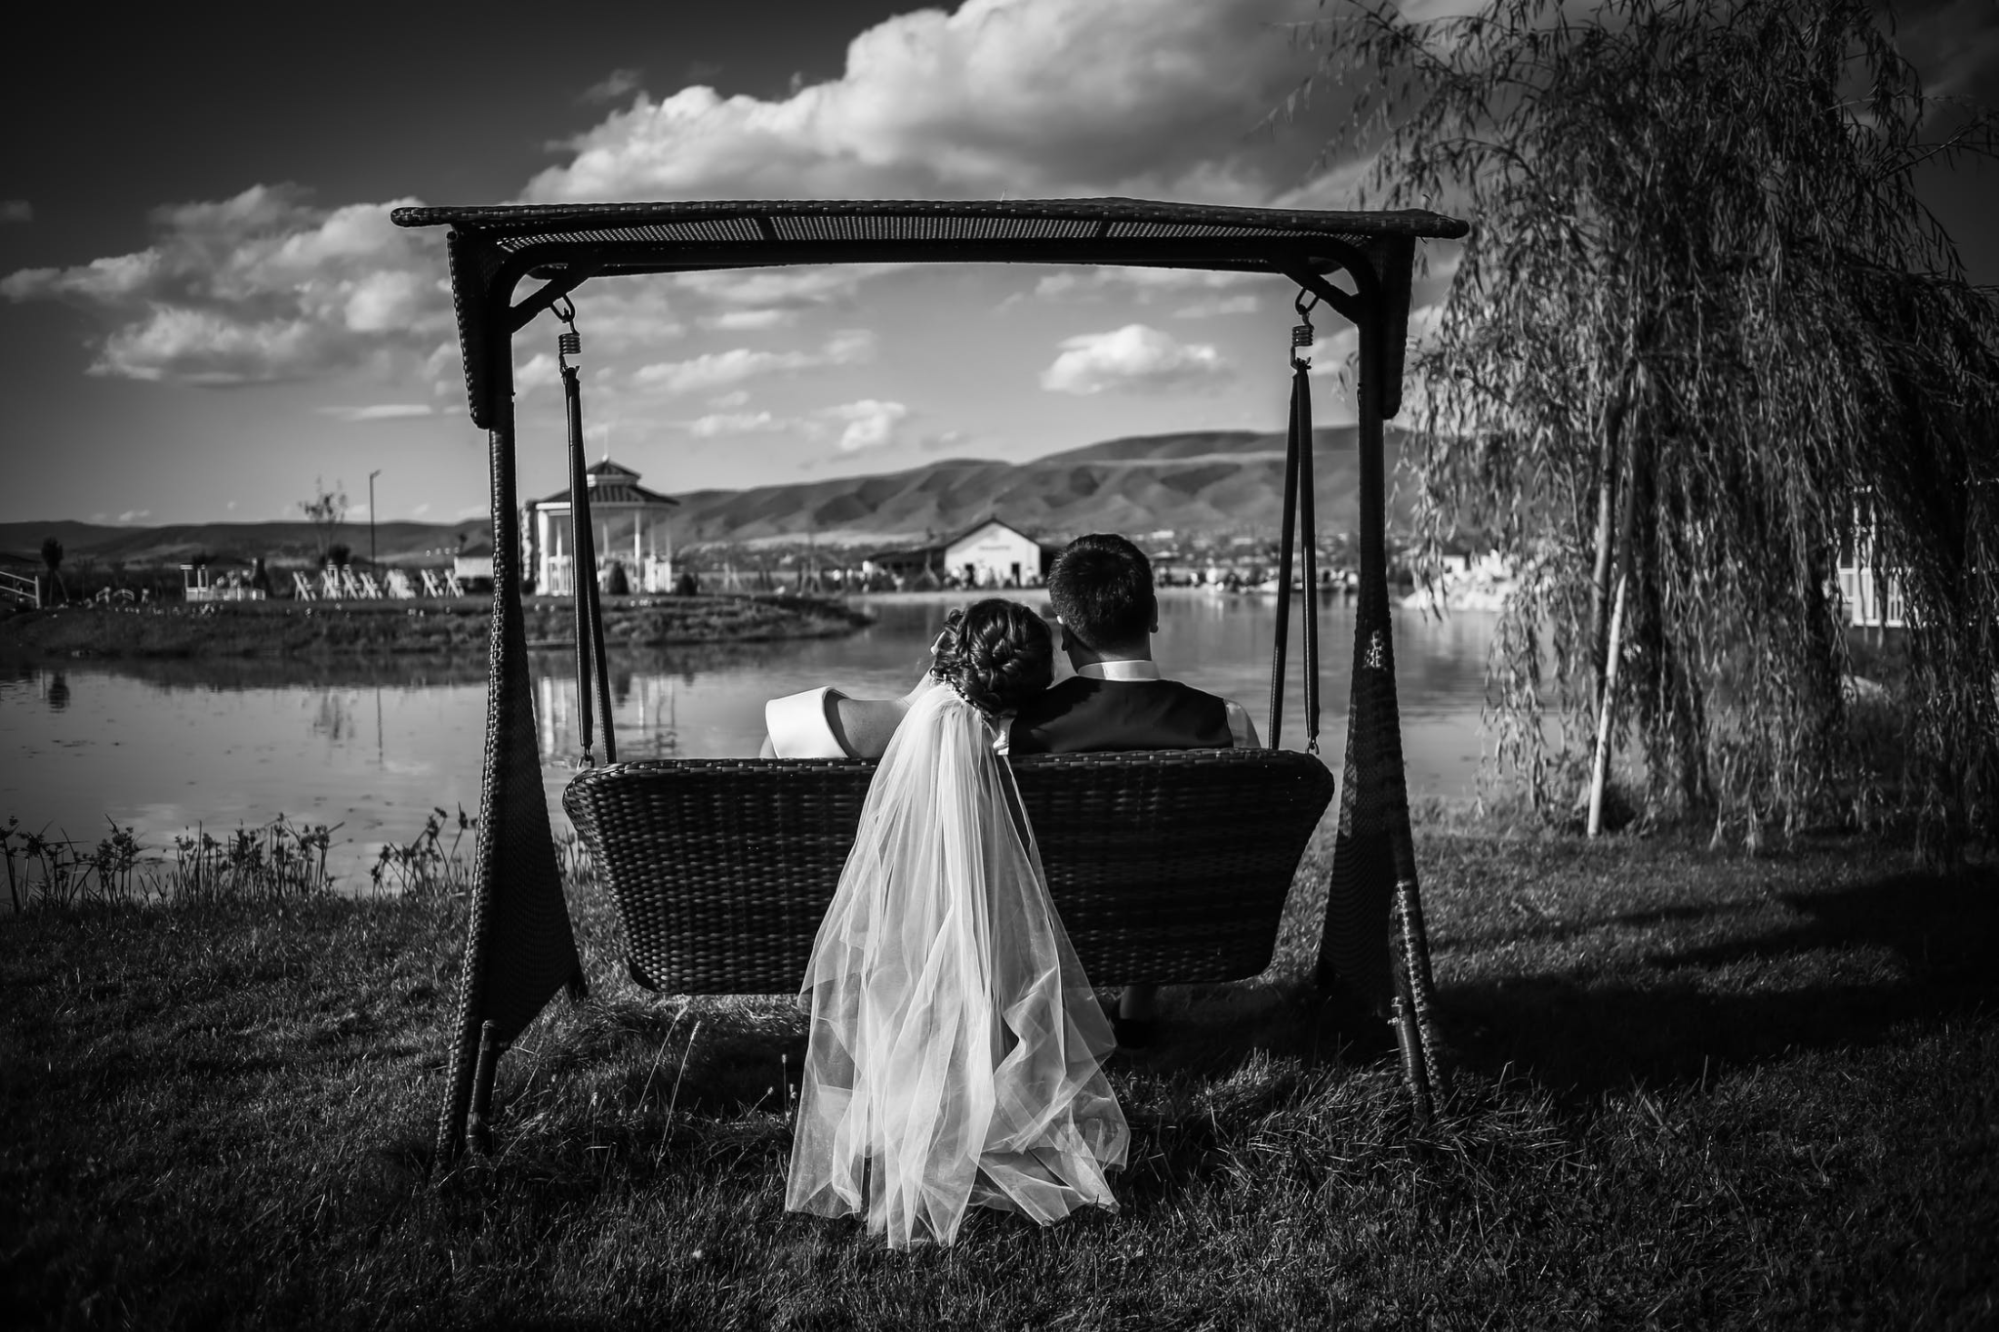 Black and while couple wedding pose on a swing